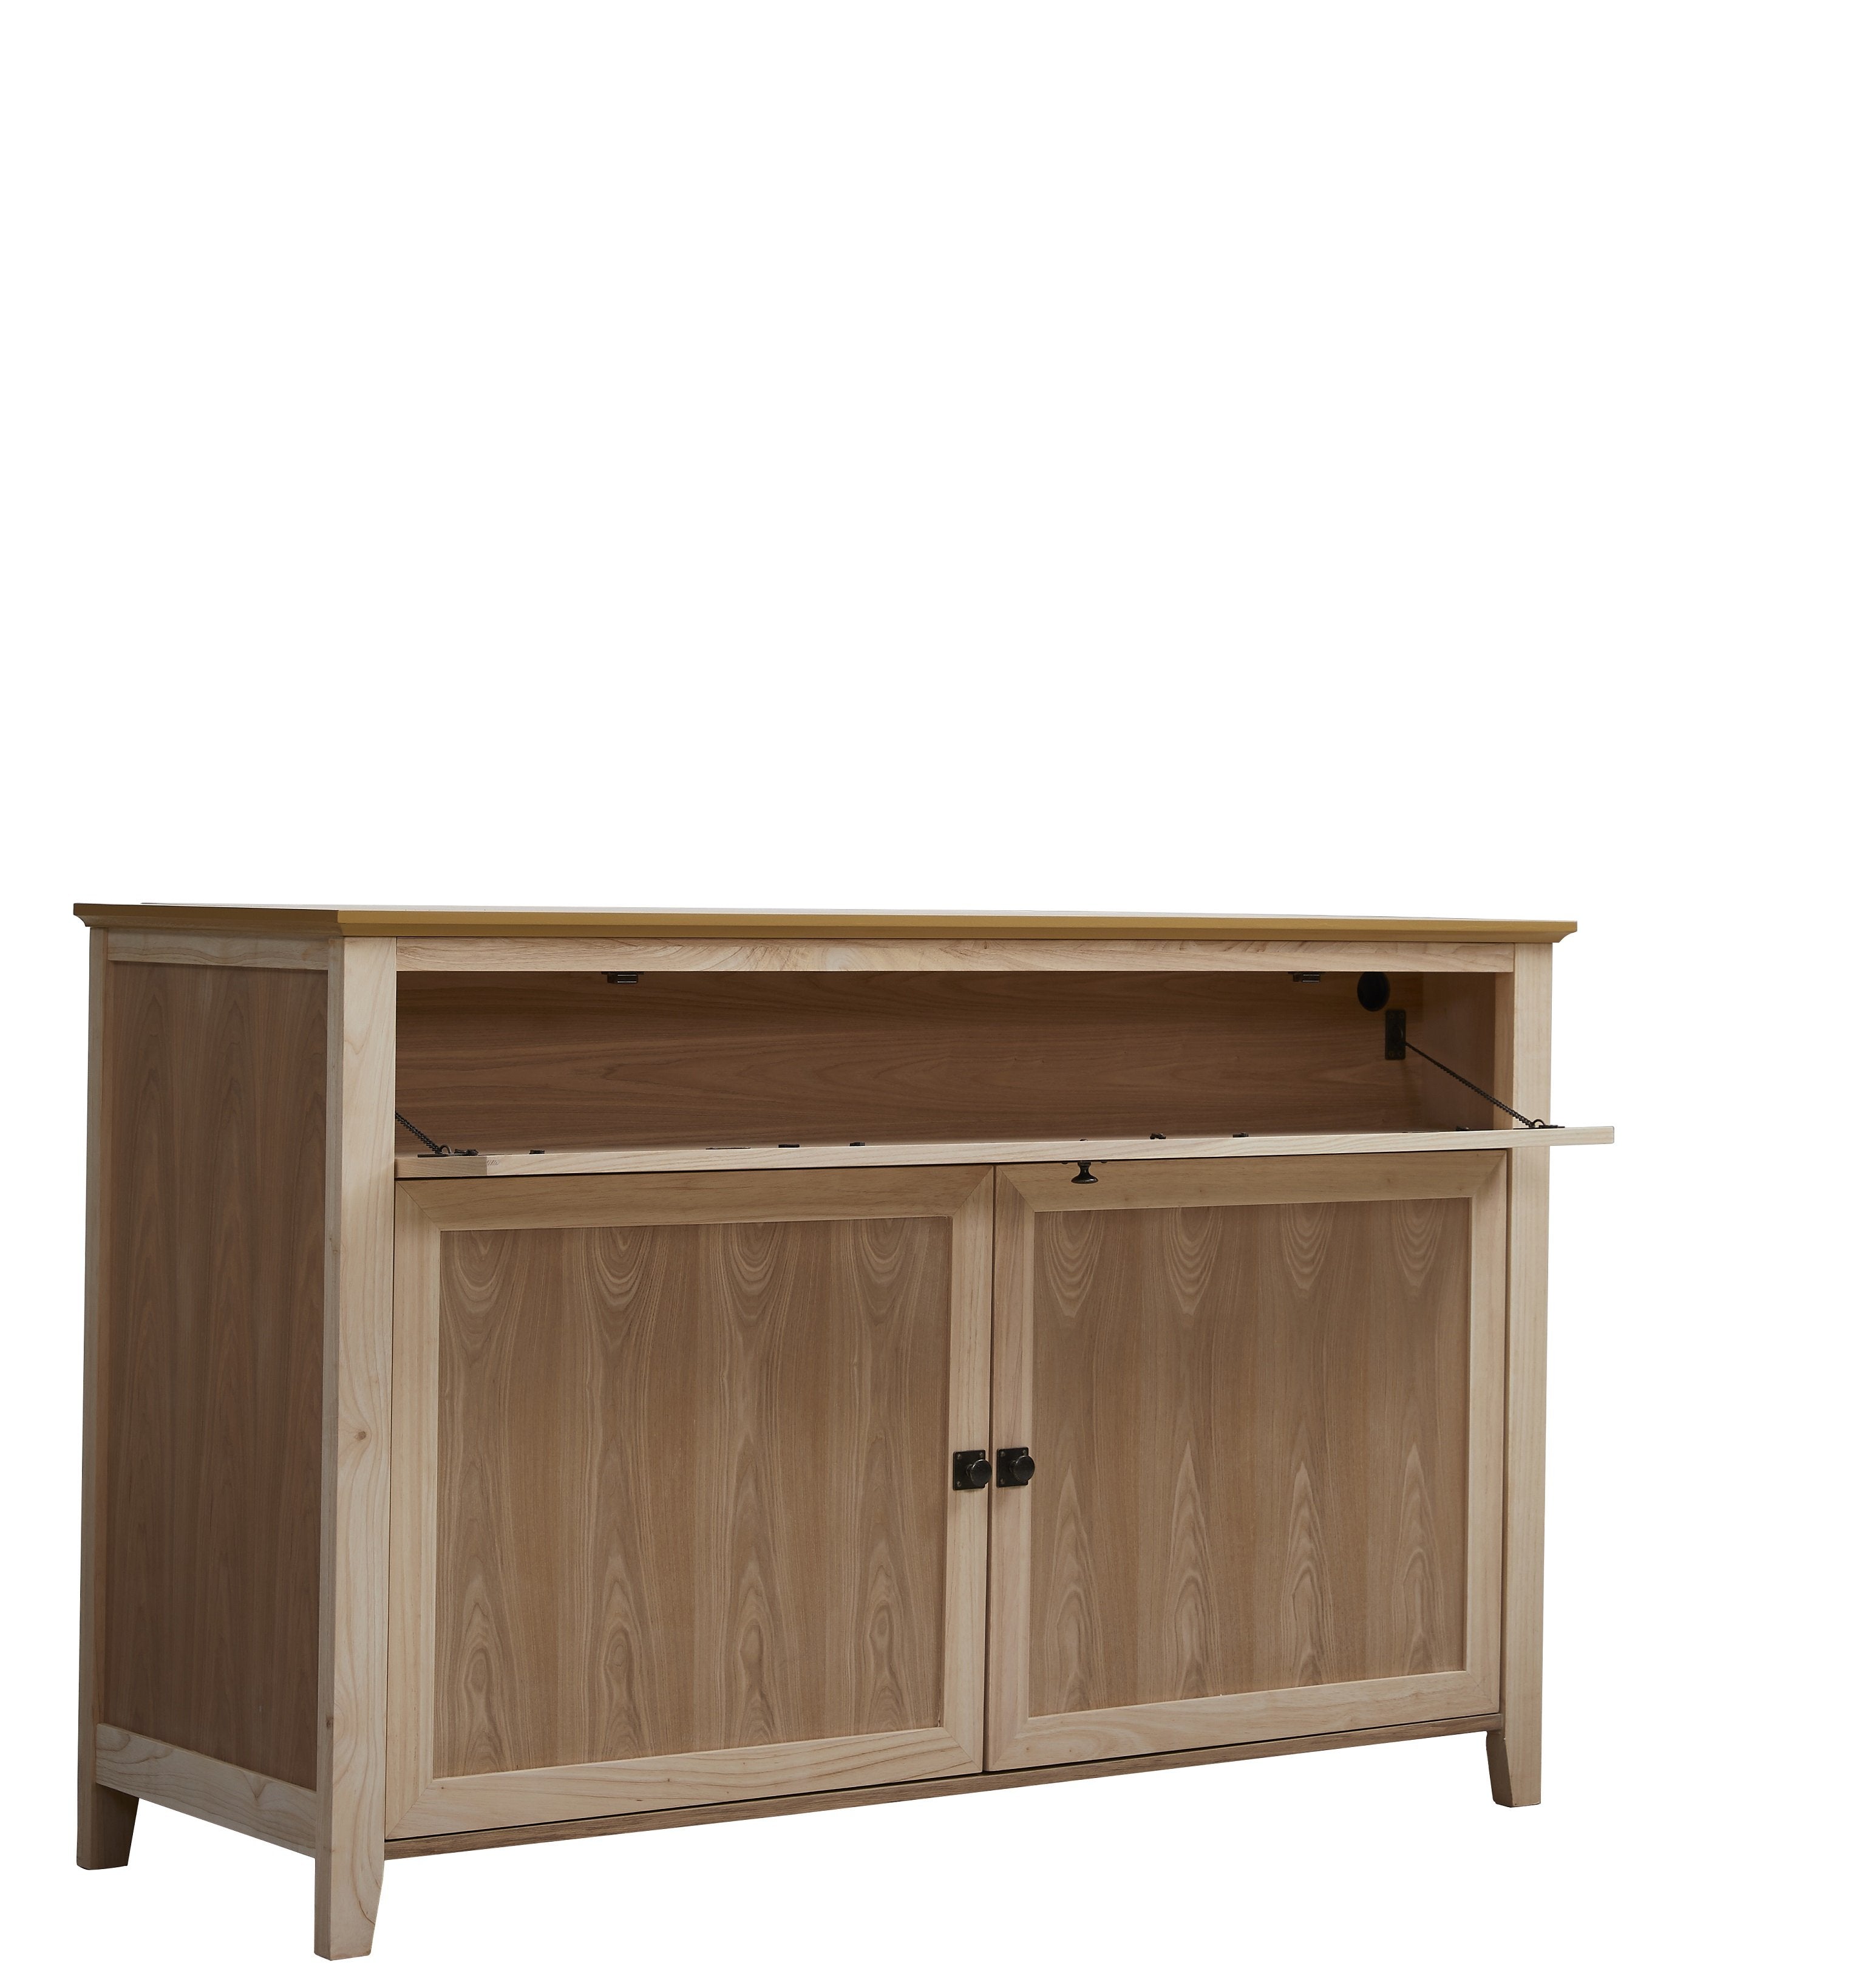 Touchstone 70162 Bungalow unfinished TV Lift Cabinet for TVs Up To 60 inch,  Unfinished Oak – Touchstone Home Products, Inc.